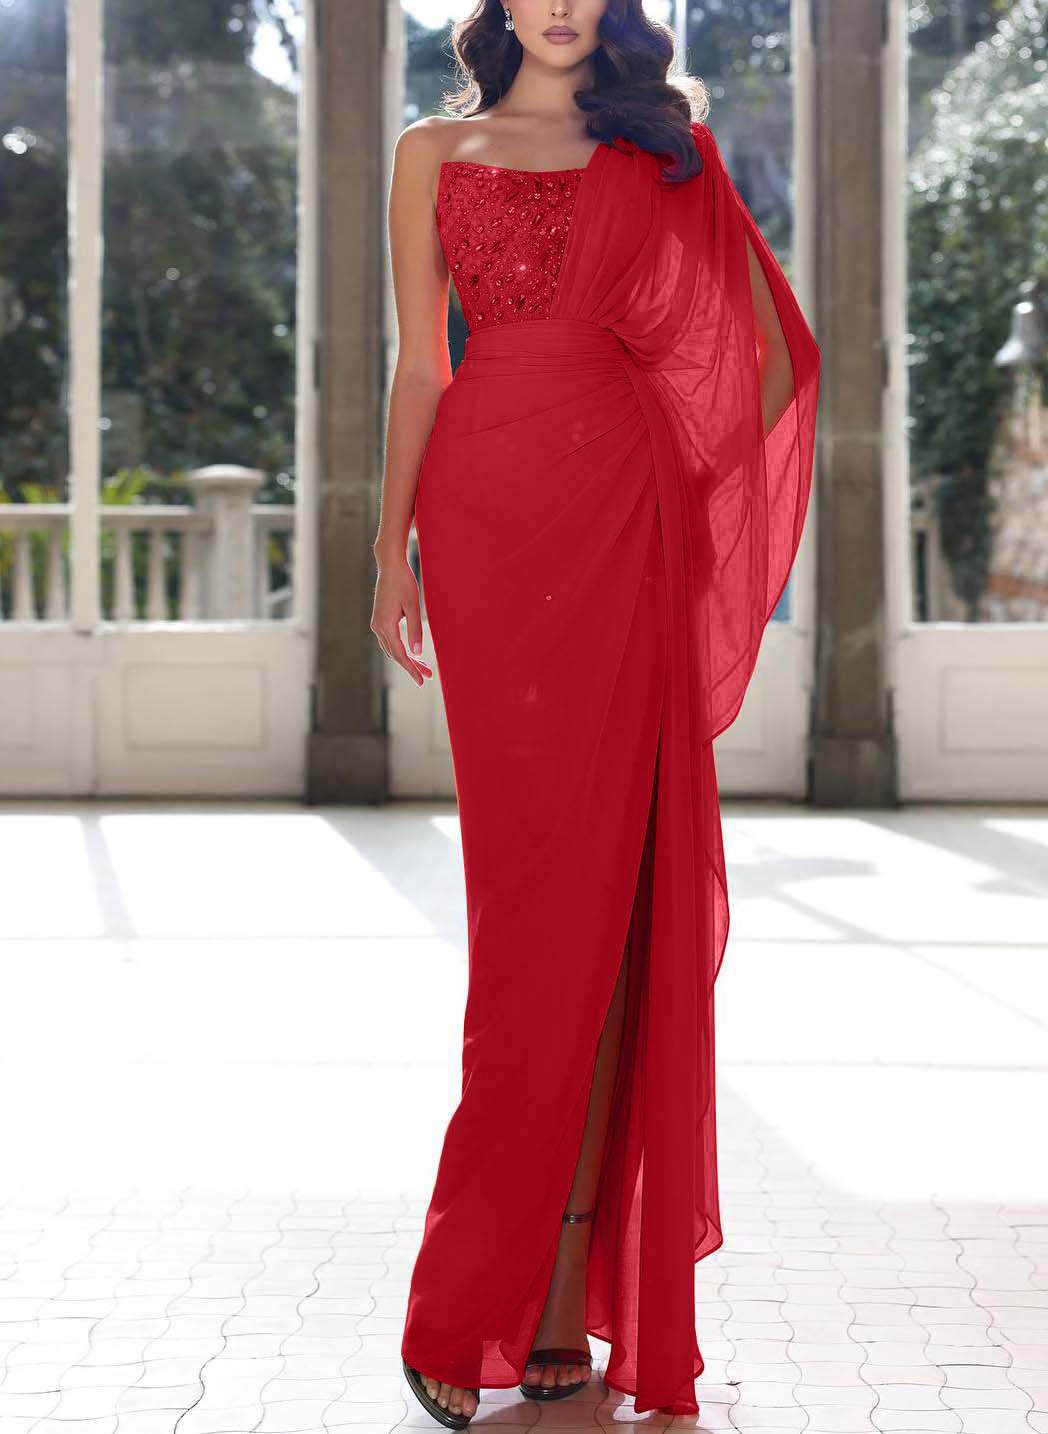 Sheath/Column One-Shoulder Chiffon/Sequined Prom Dresses With Split Front